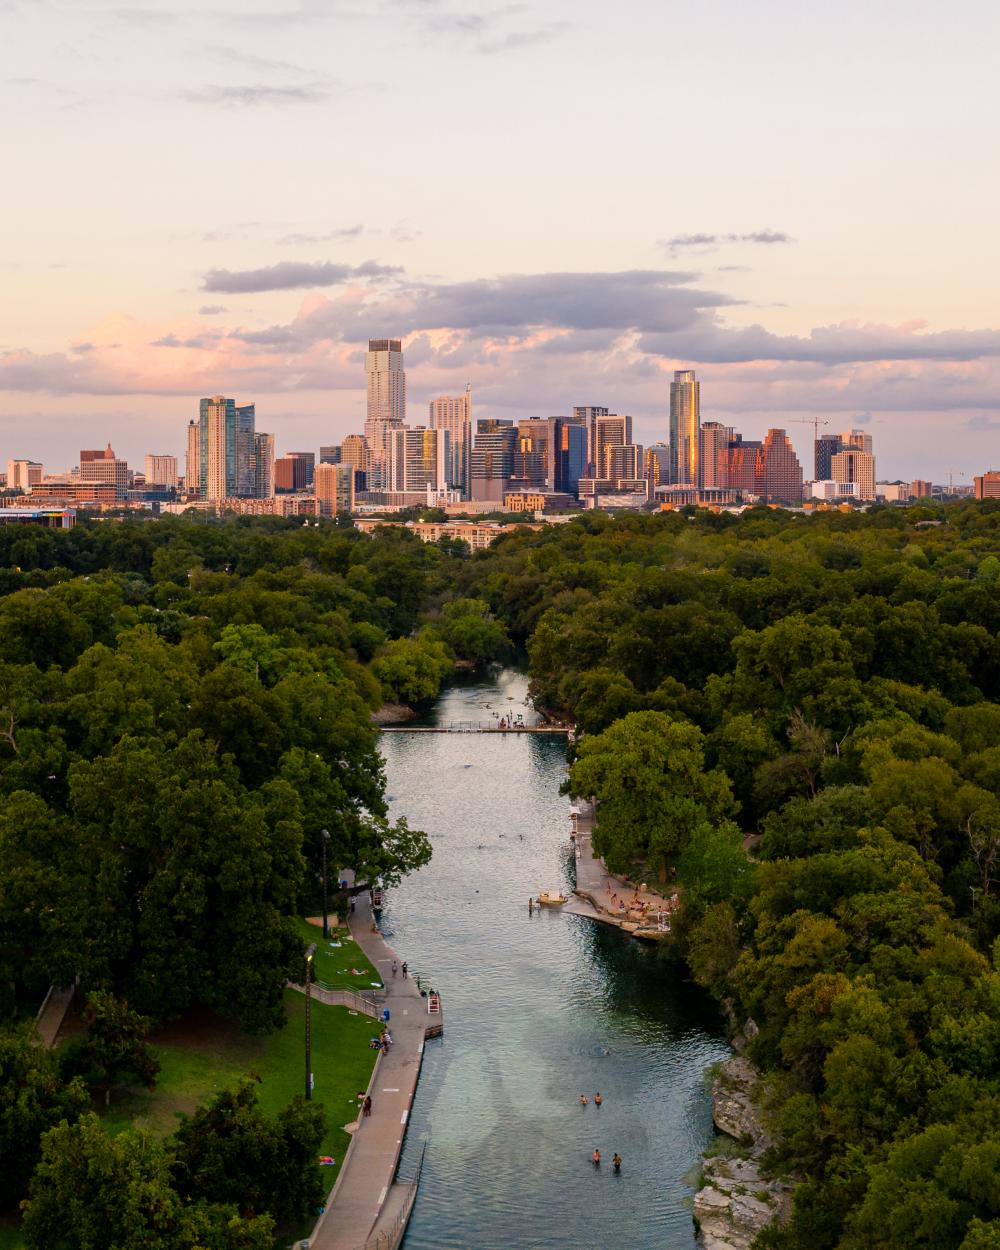 Aerial view of Barton Springs Pool and downtown Austin Texas skyline